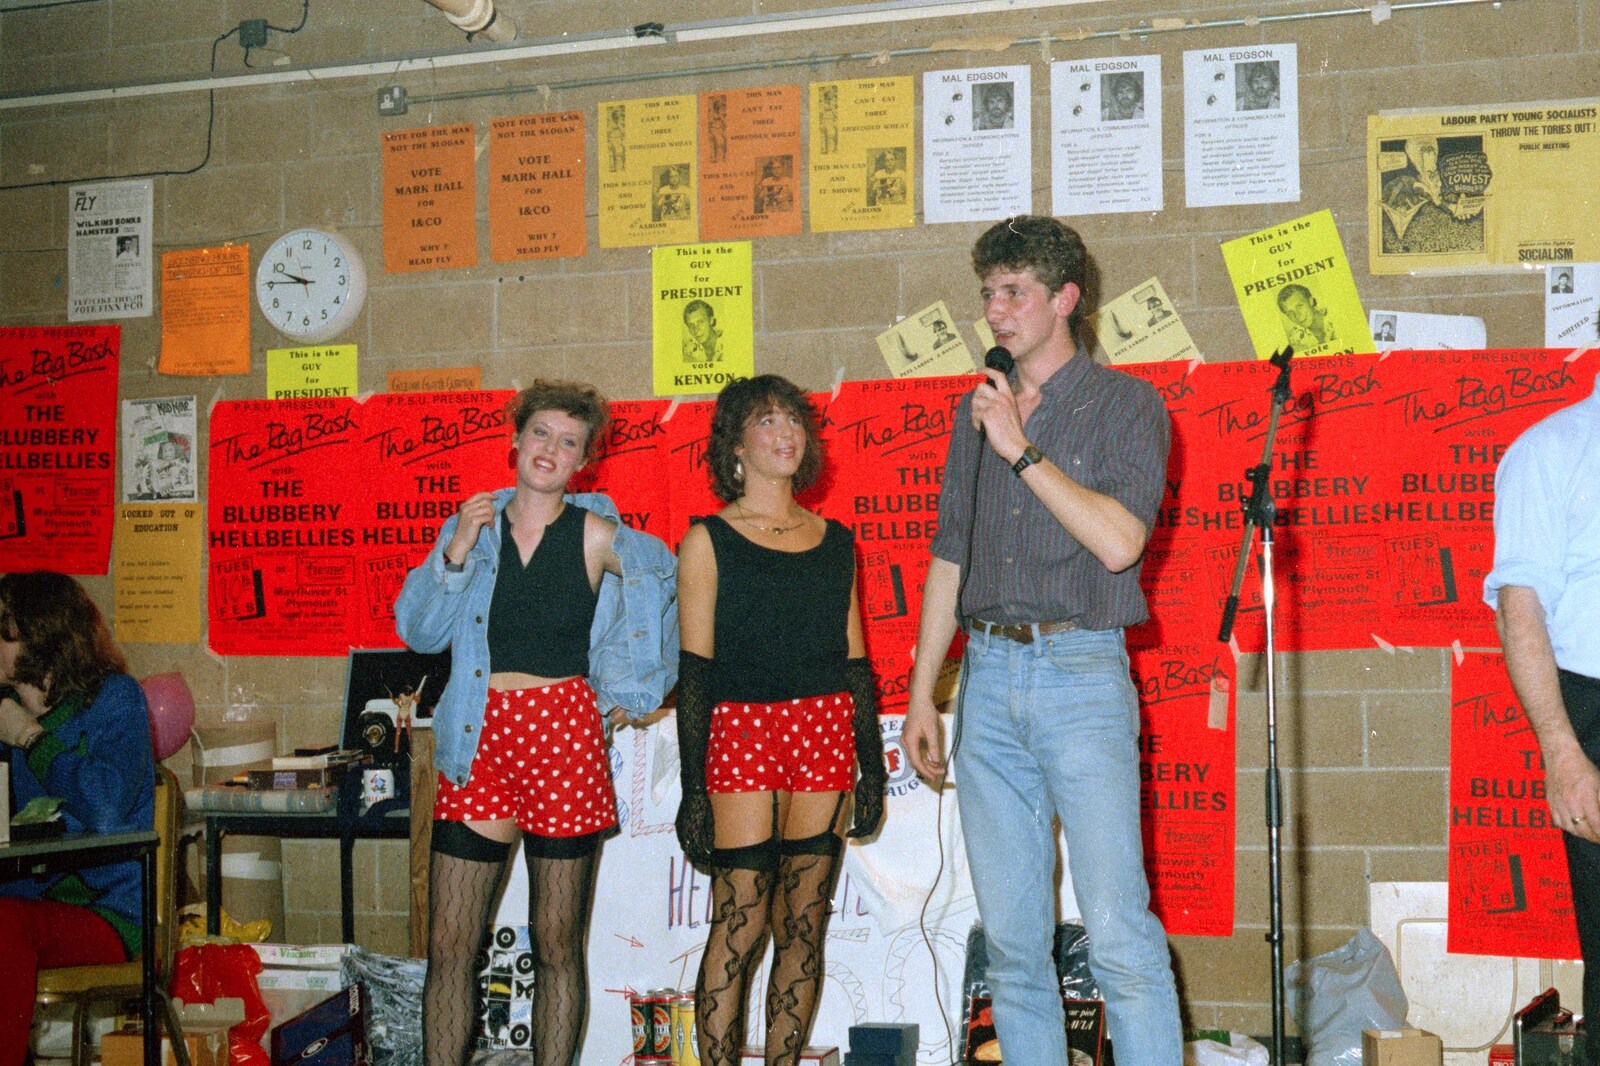 The auction continues from Uni: Pirate RAG Bash, Games Nights and Brian's Beard, PPSU, Plymouth - 10th February 1987